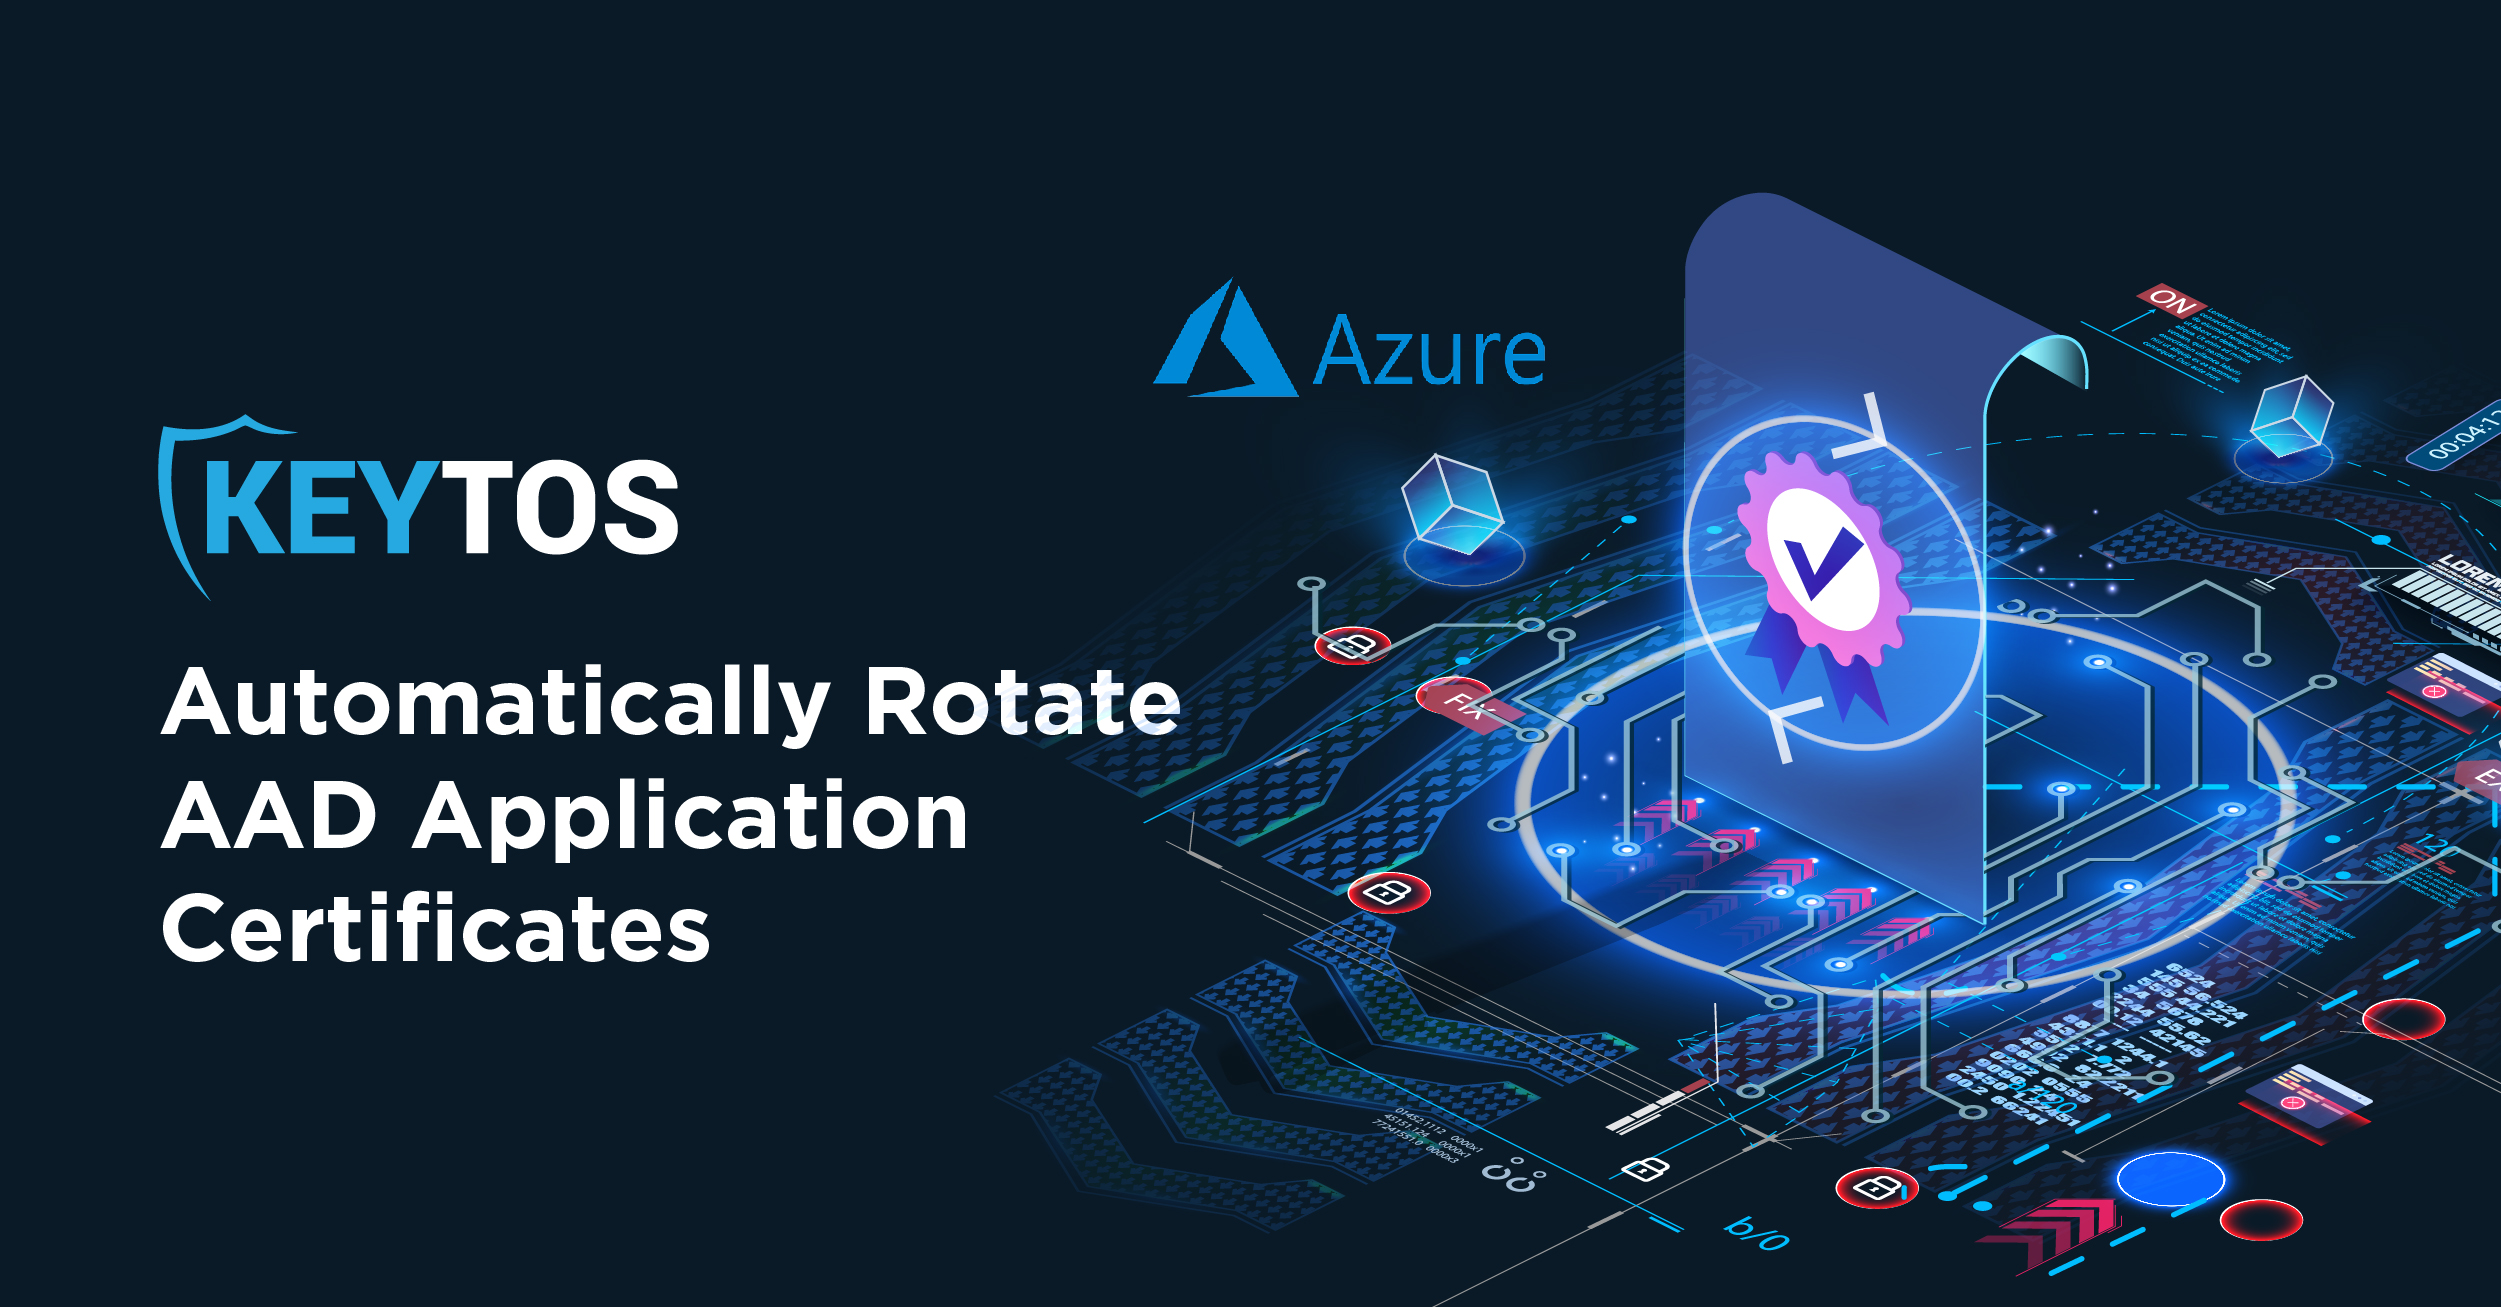 How to Automatically Rotate Azure AD Application Certificates